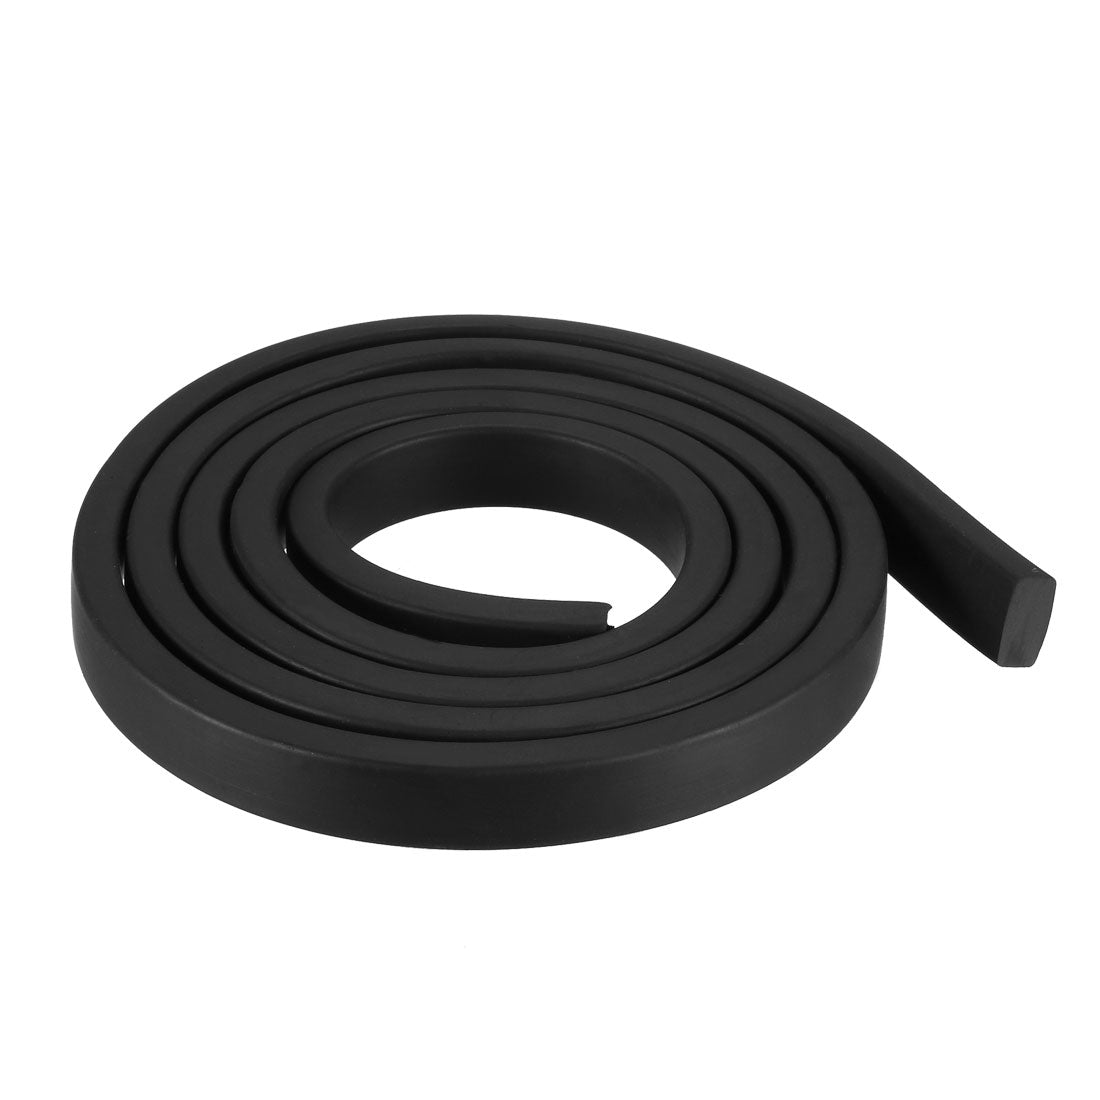 uxcell Uxcell Solid Rectangle Rubber Seal Strip 10mm Wide 5mm Thick, 1 Meter Long Black